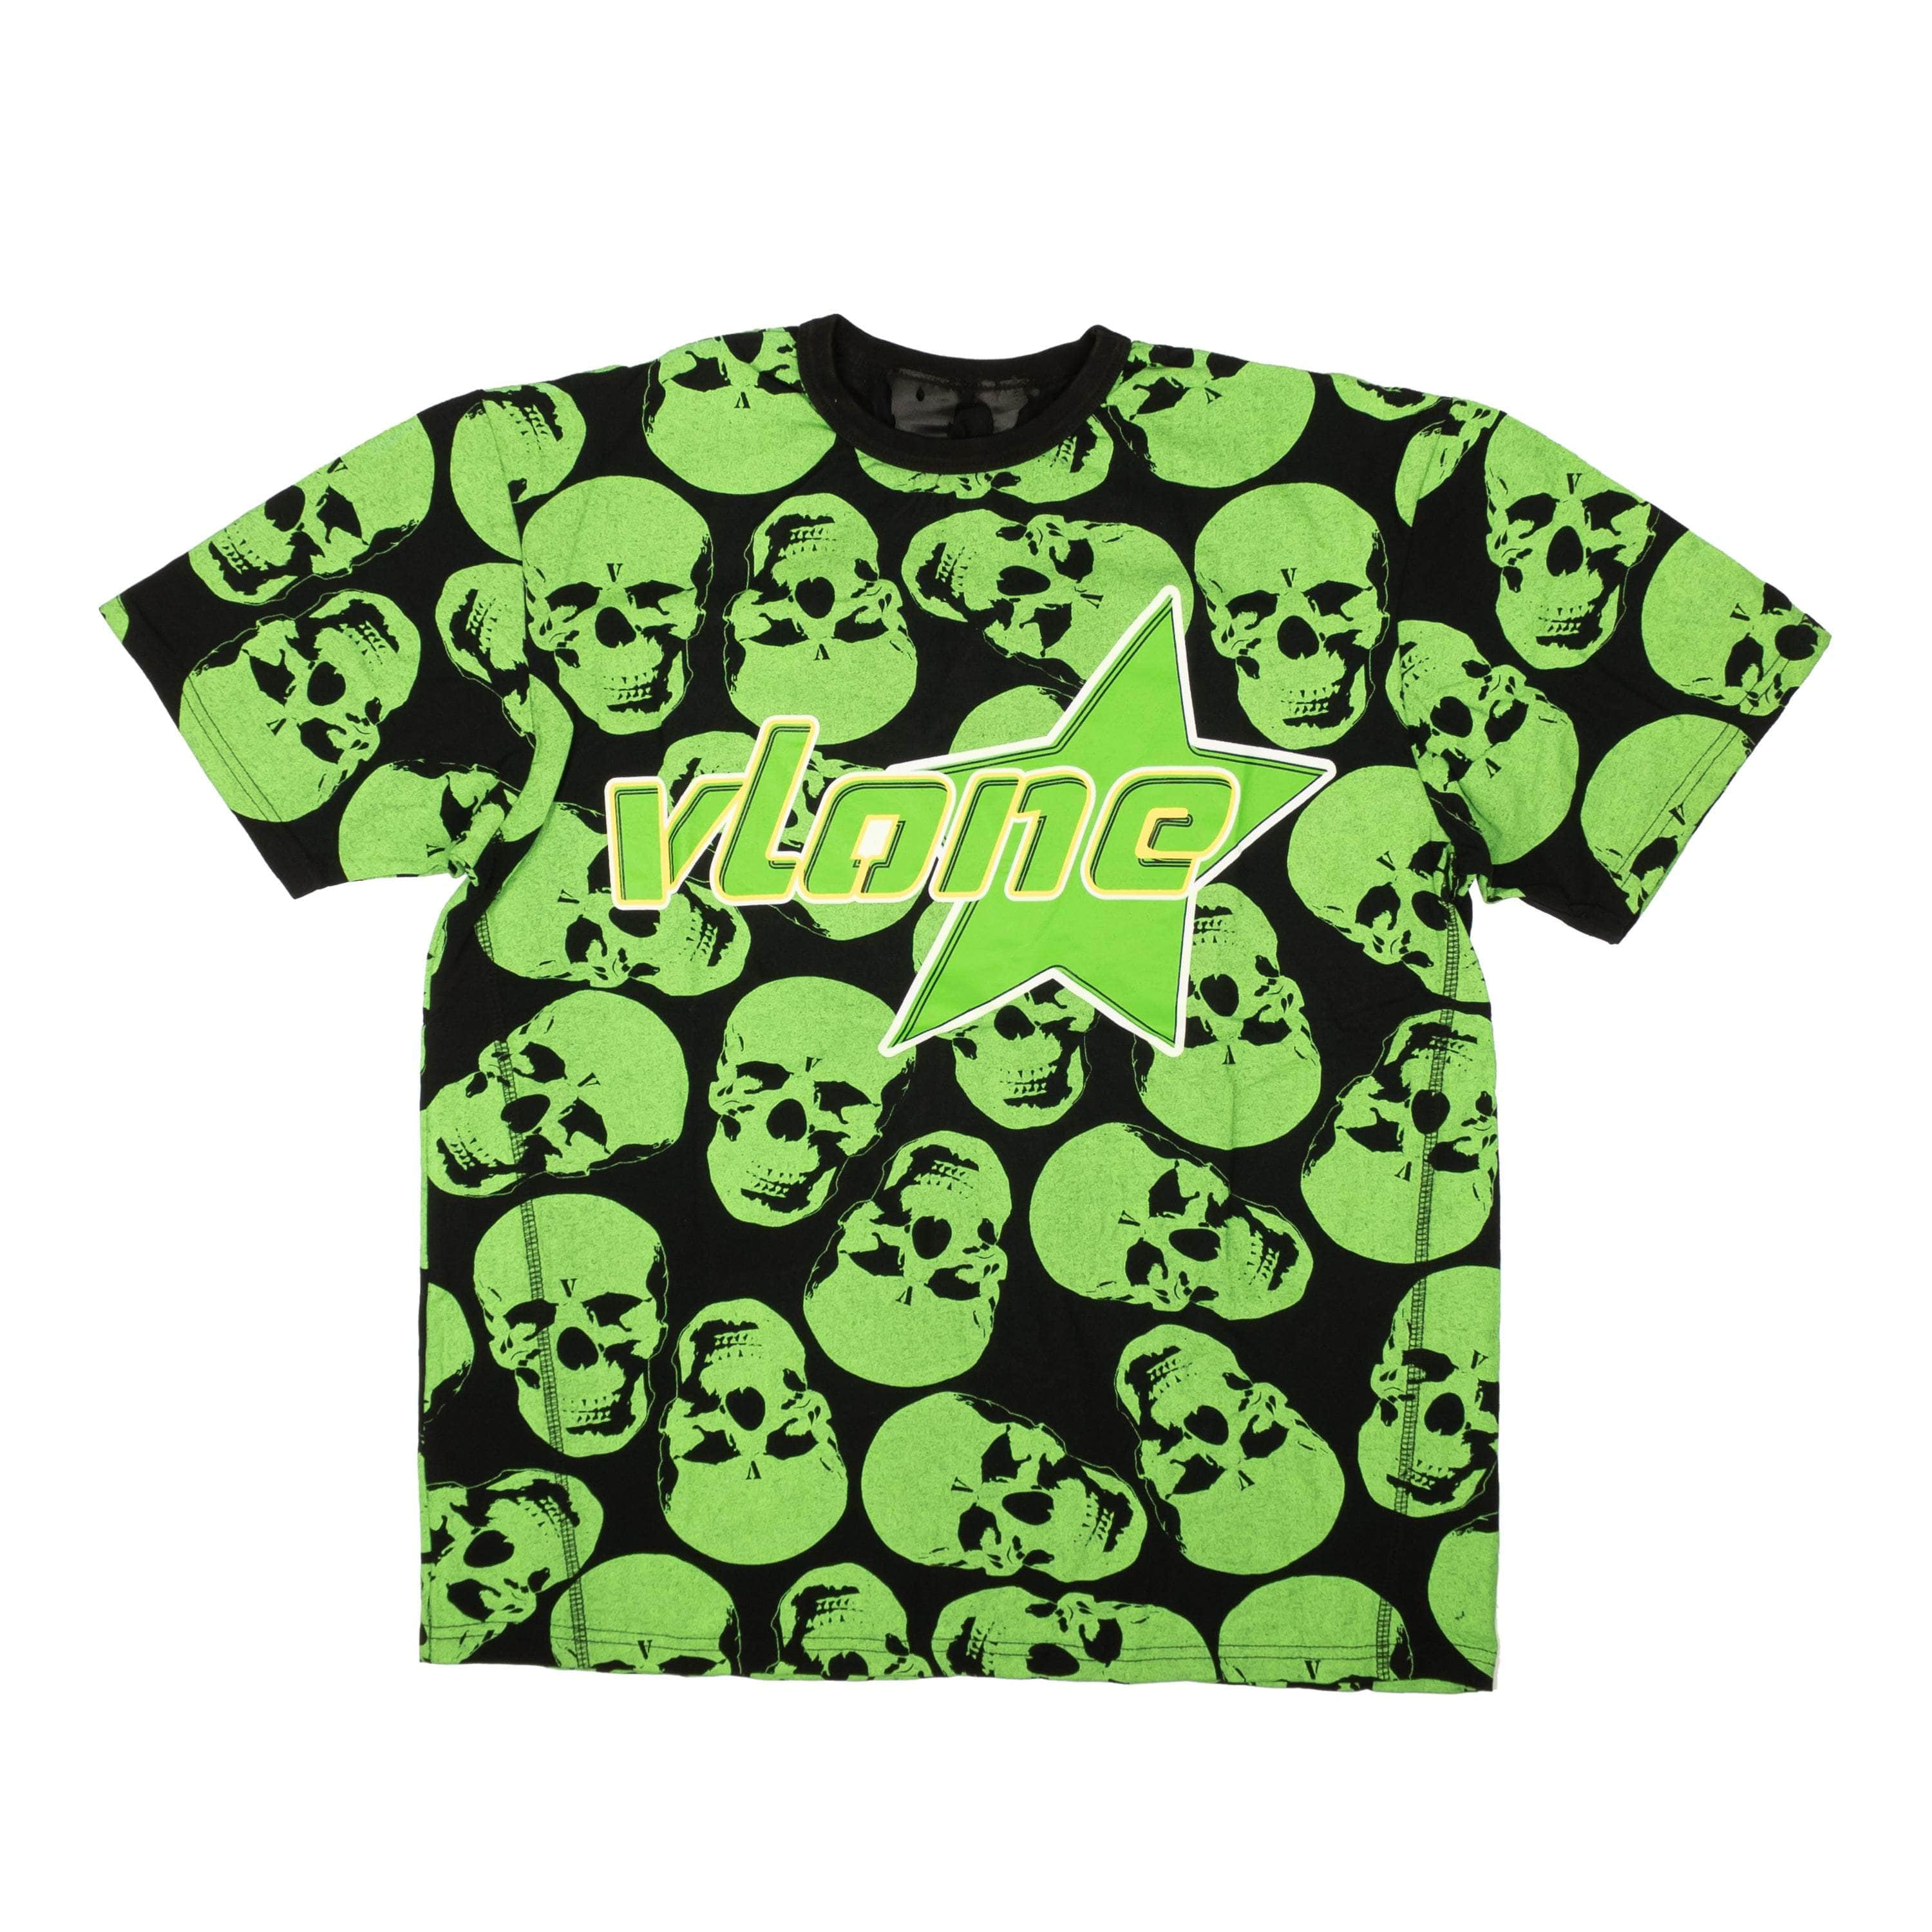 Vlone channelenable-all, chicmi, couponcollection, gender-mens, main-clothing, mens-shoes, size-l, size-m, size-s, size-xl, size-xxl, under-250, vlone Black And Green Crypt Short Sleeve T-Shirt